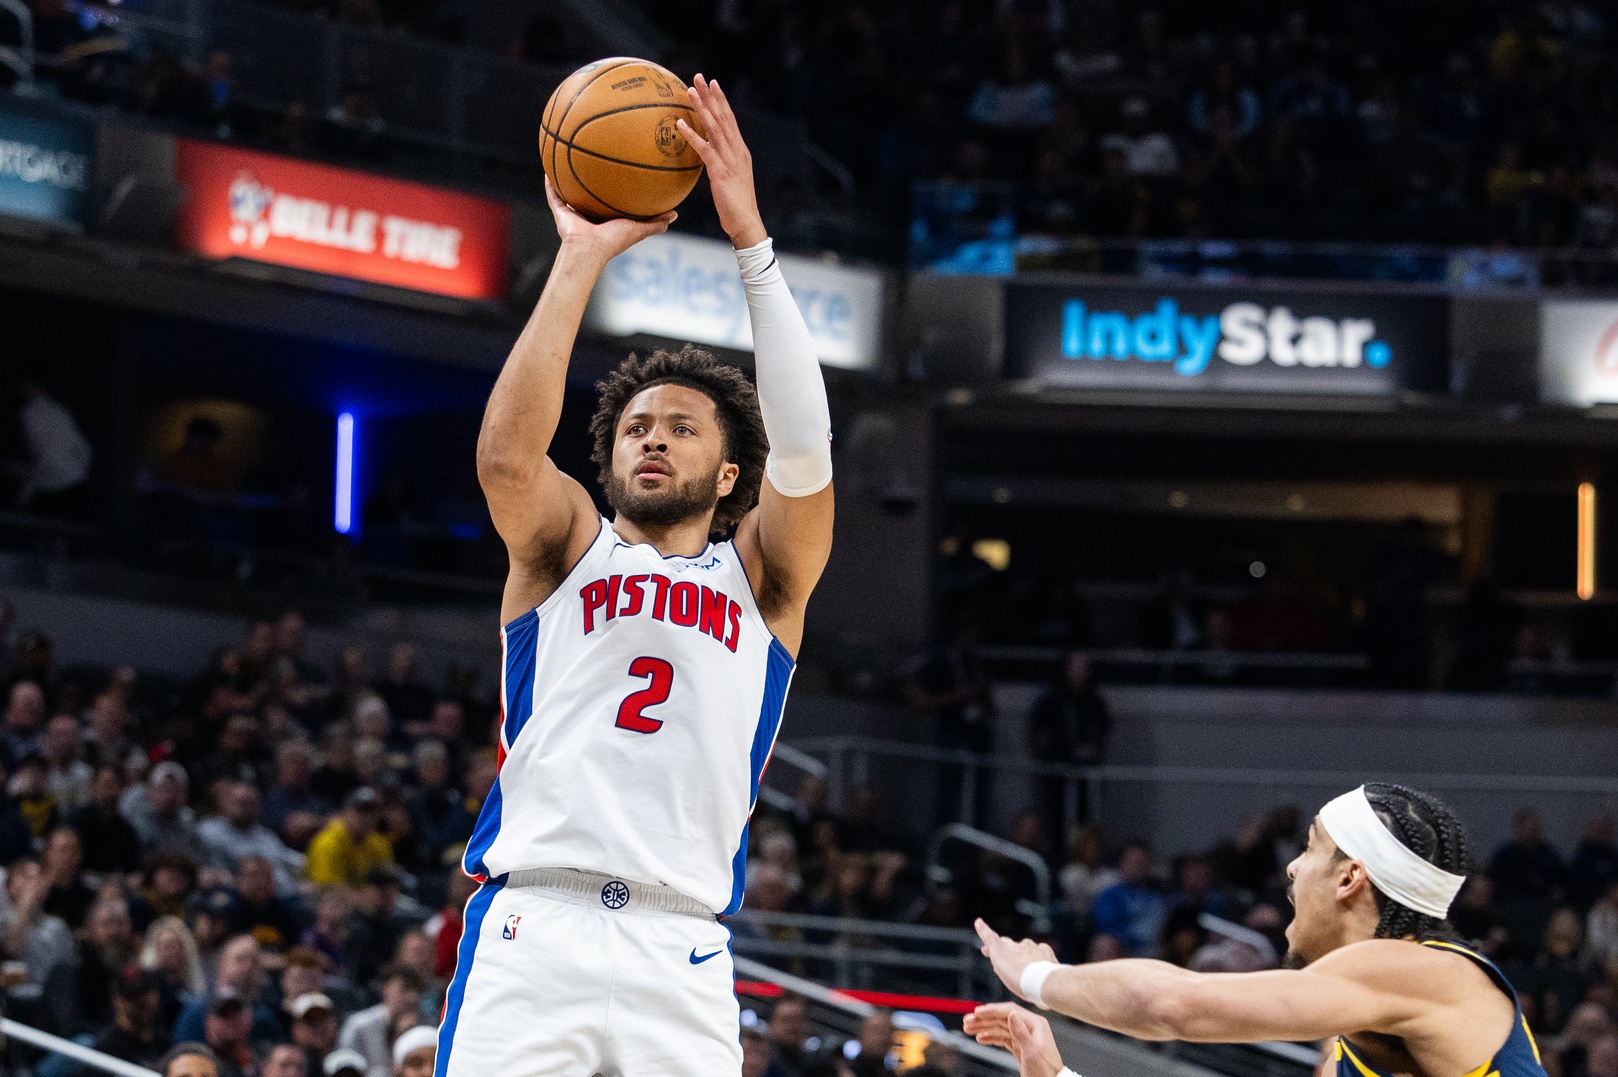 Cade Cunningham should be getting the Detroit Pistons many free throws but he is not.